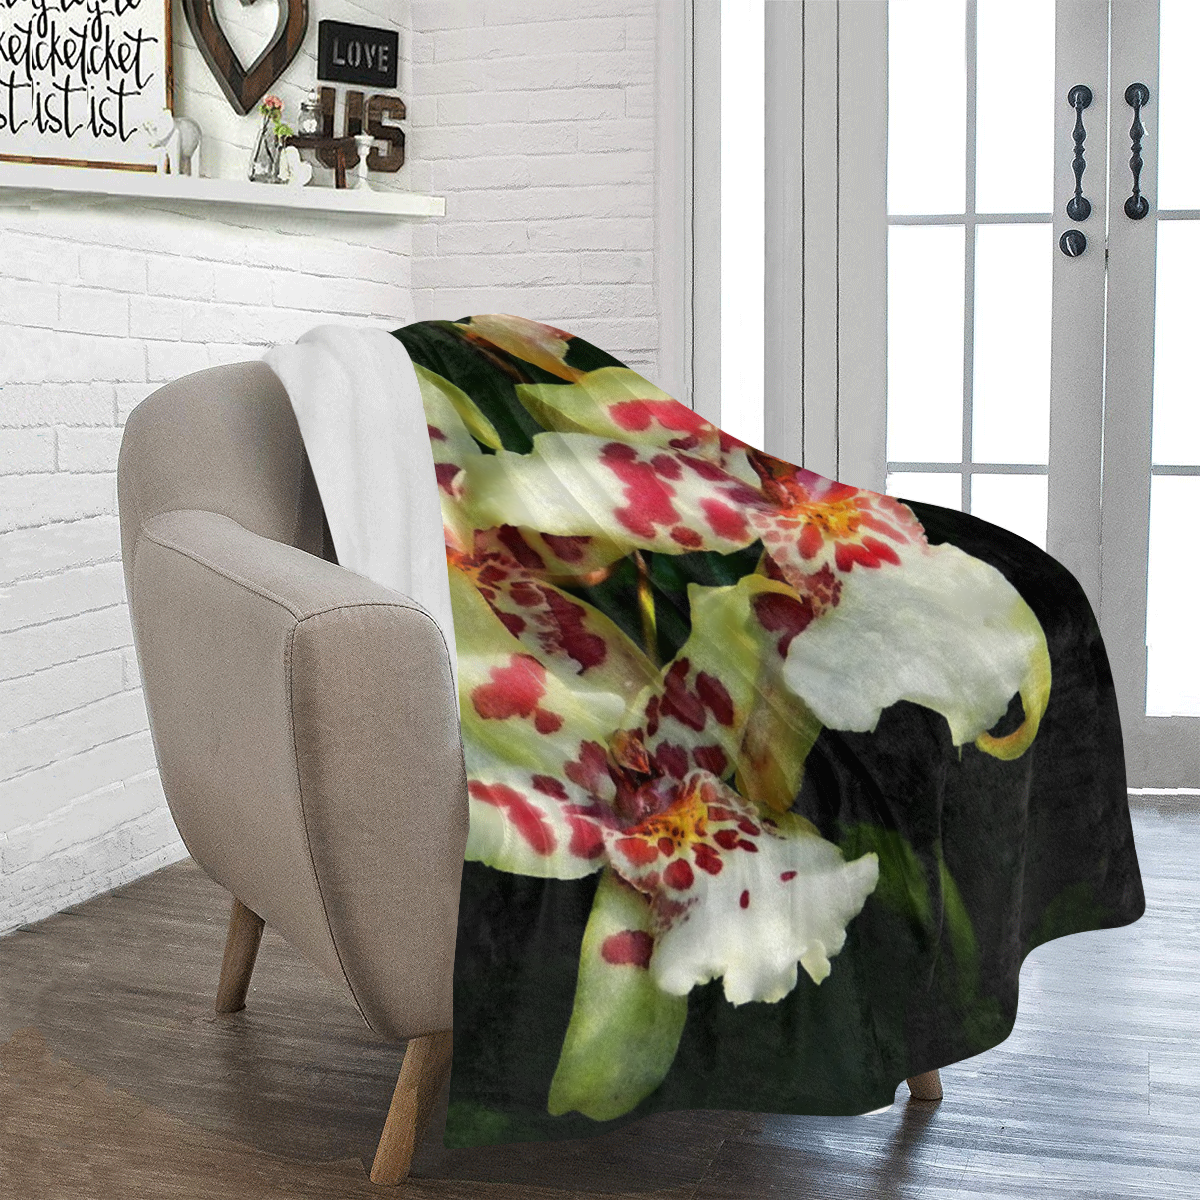 spotted orchids Ultra-Soft Micro Fleece Blanket 43''x56''